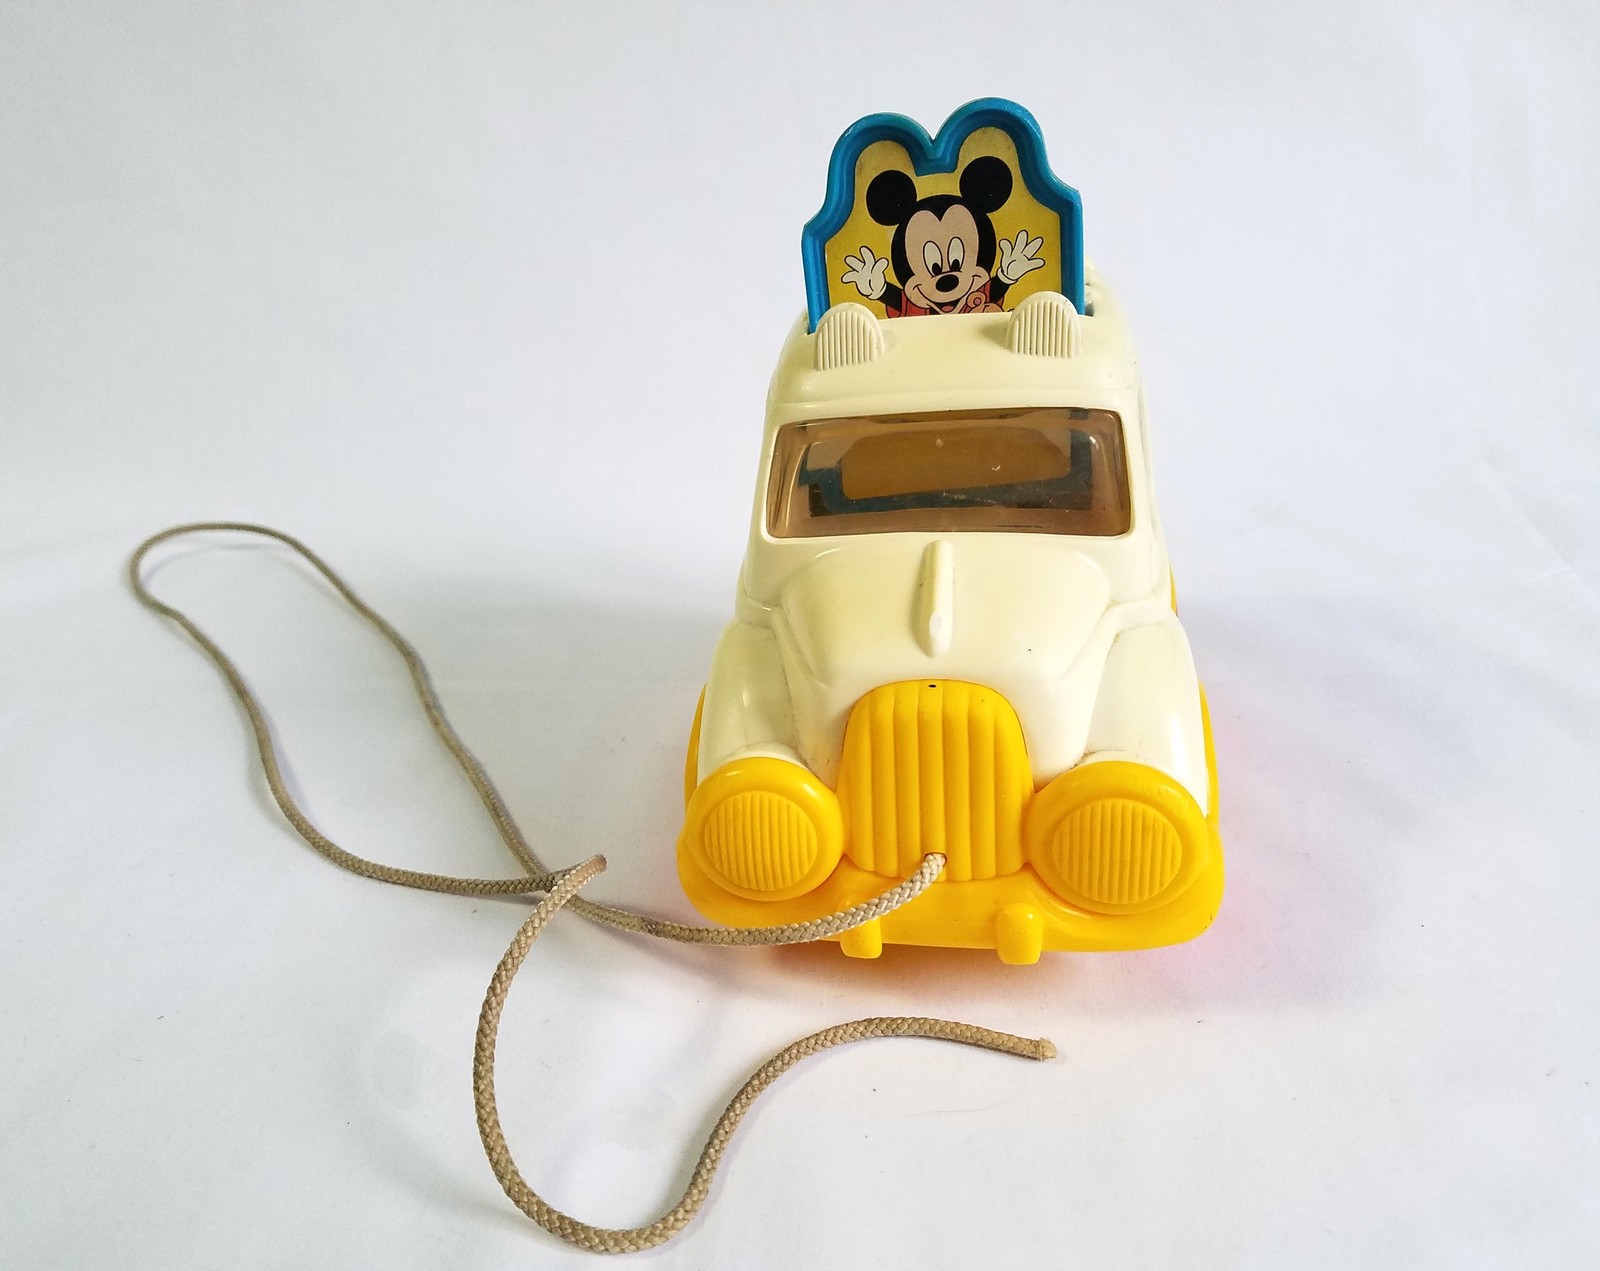 Vintage Disney Toy Pull Along Toddler Toy Mickey and Friends Vintage Pull Toy - $6.95